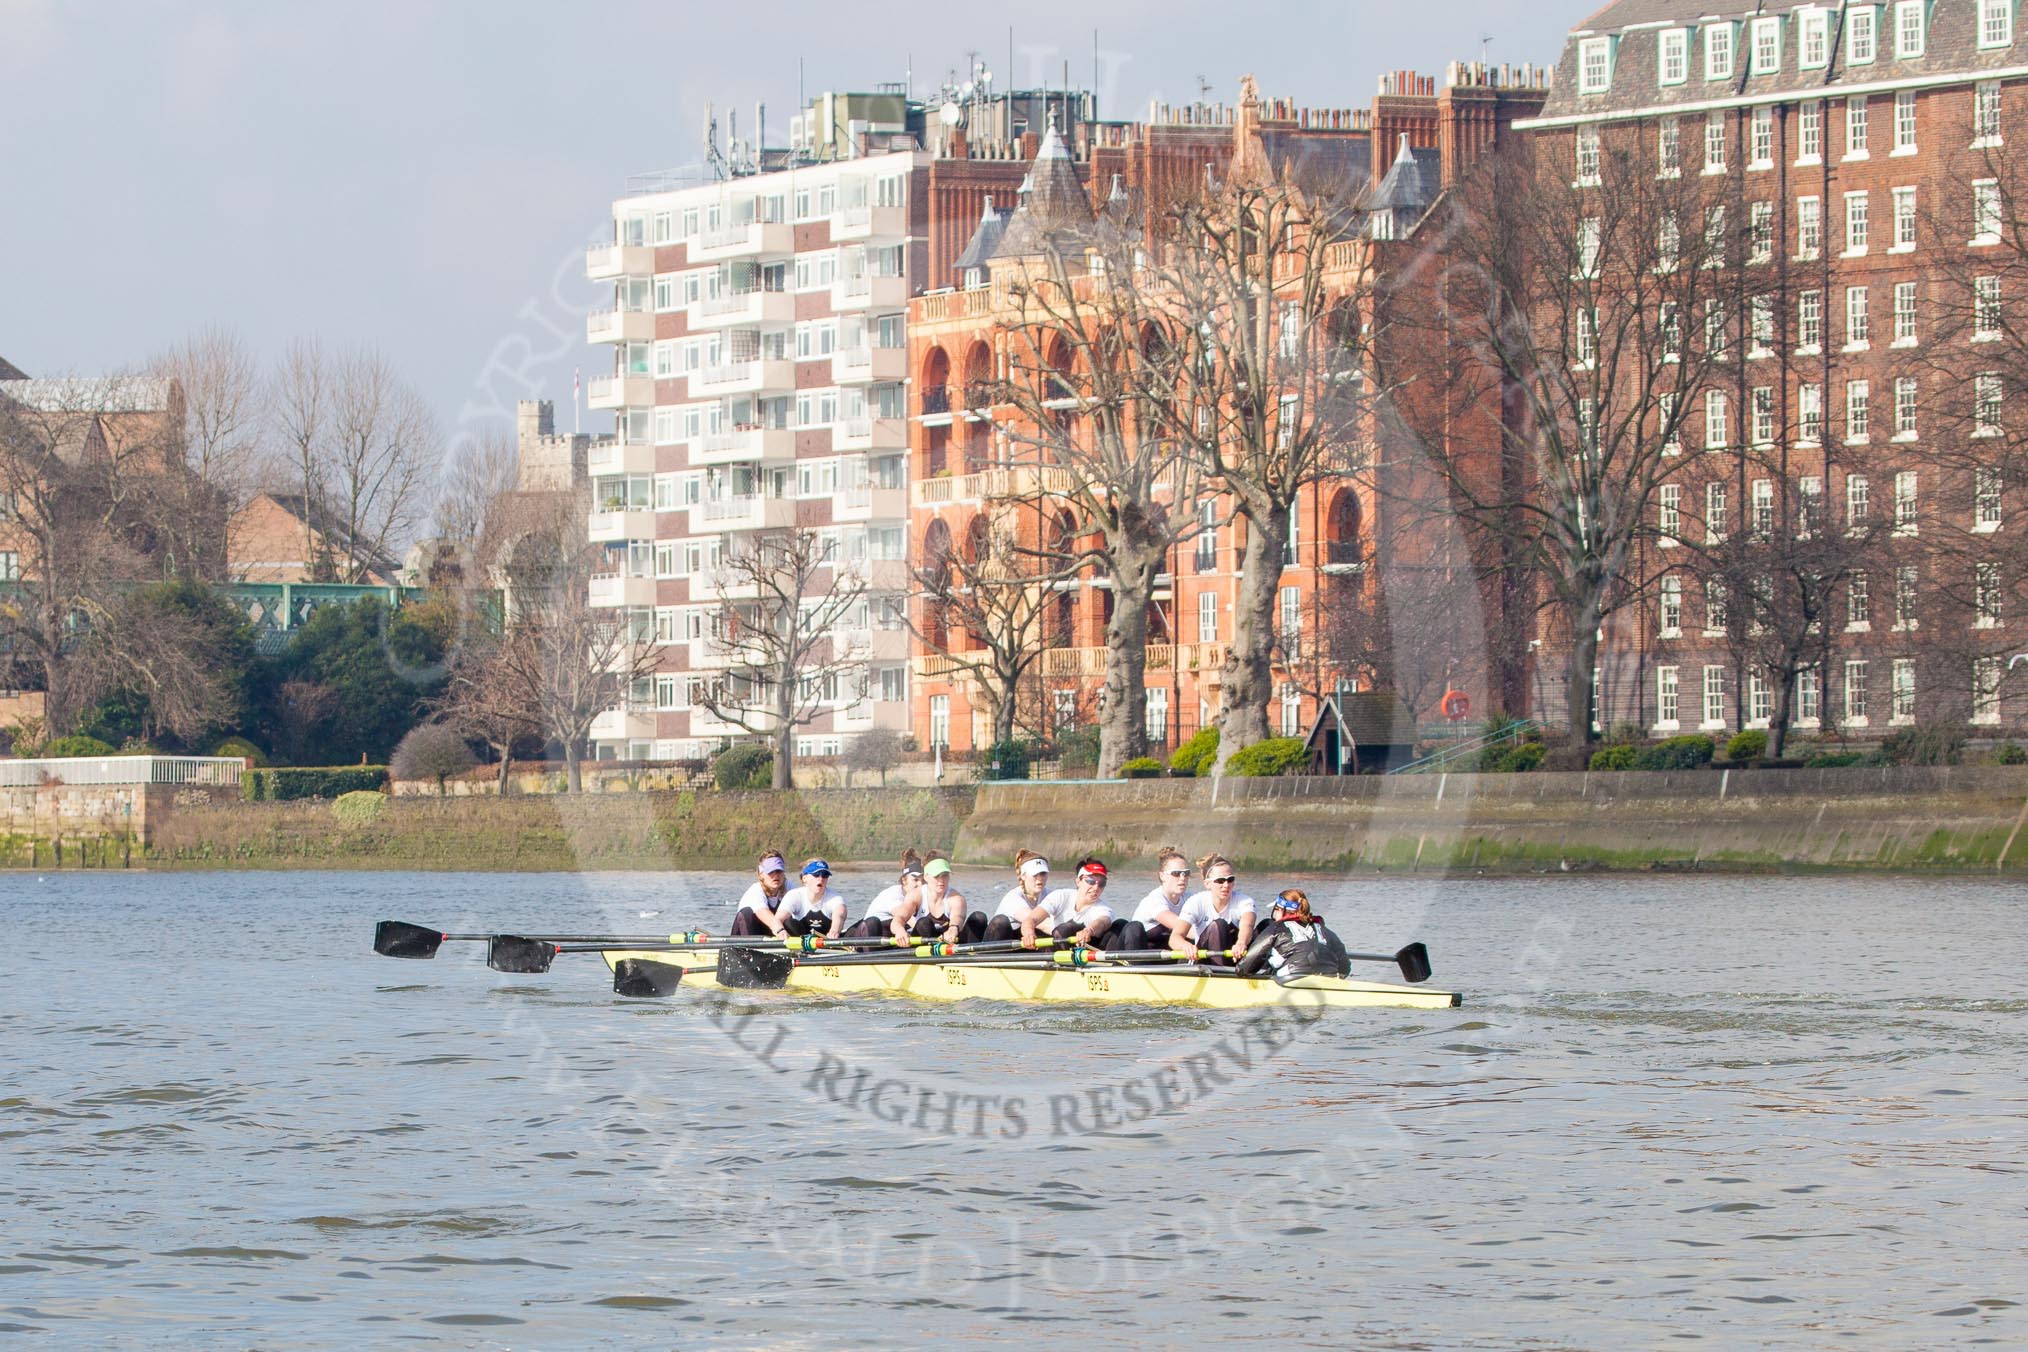 The Boat Race season 2014 - fixture OUWBC vs Molesey BC.




on 01 March 2014 at 12:35, image #89